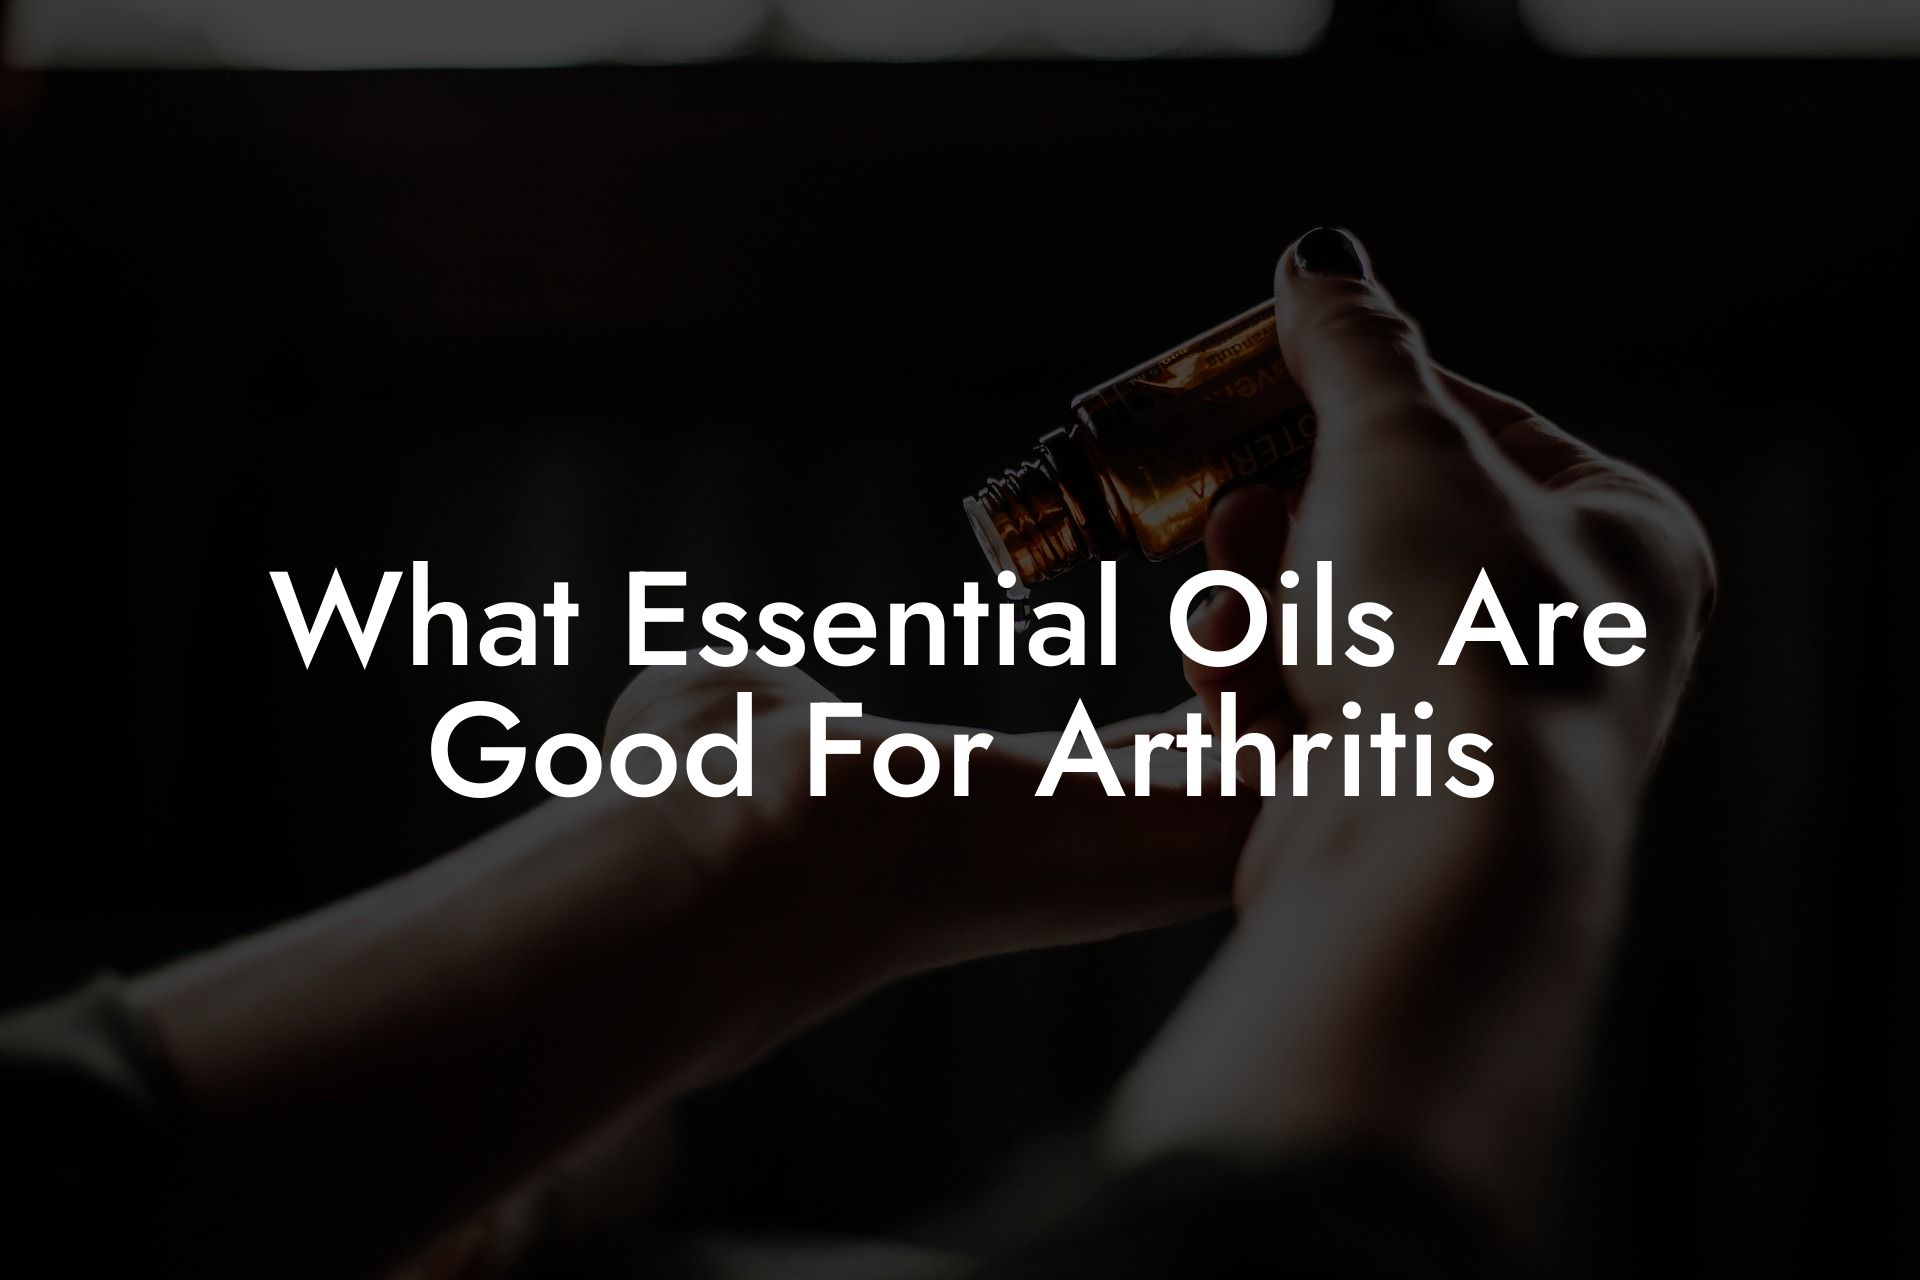 What Essential Oils Are Good For Arthritis